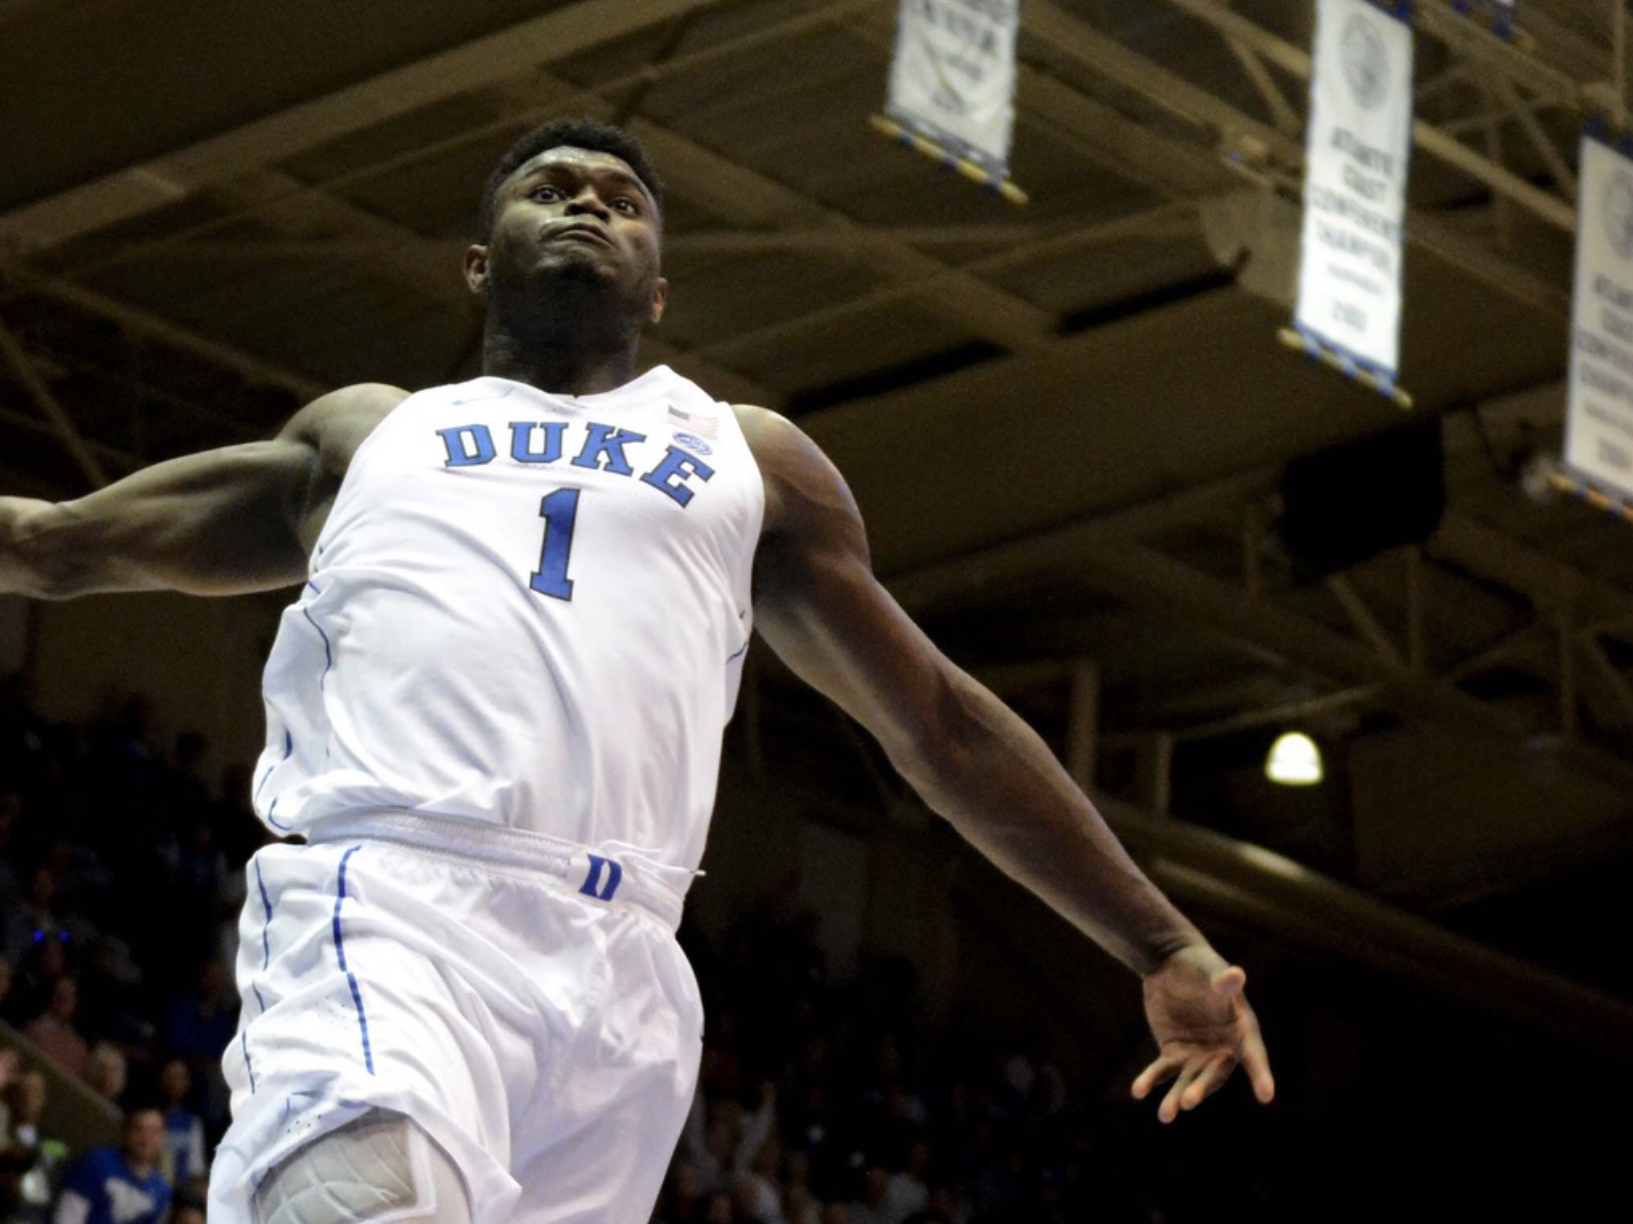 WATCH: There’s nothing Duke’s Zion Williamson can’t do